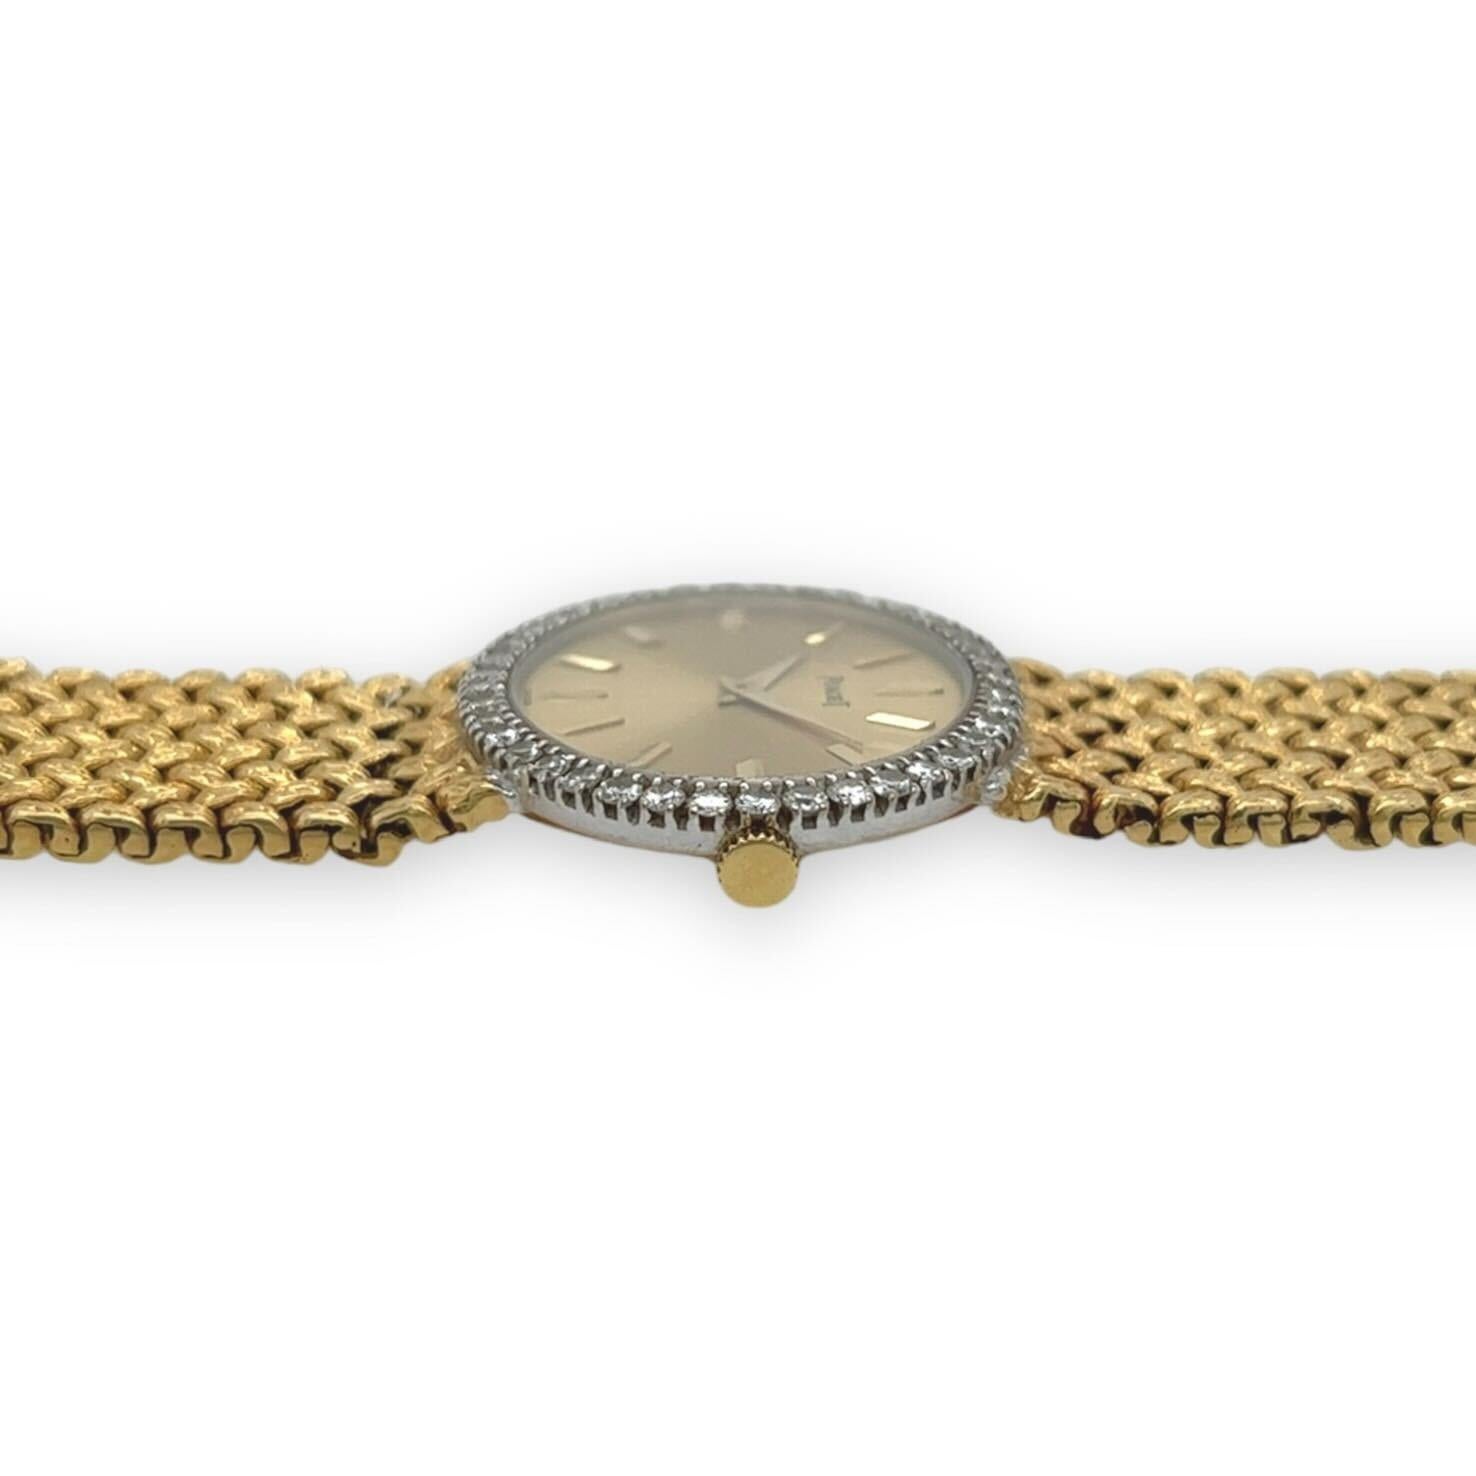 An 18 karat yellow and white gold and diamond watch, Piaget.  The manual movement watch with a horizontal oval dial of matte gold with polished gold baton hour markers, the bezel enhanced with forty (40) white gold set brilliant cut diamonds,